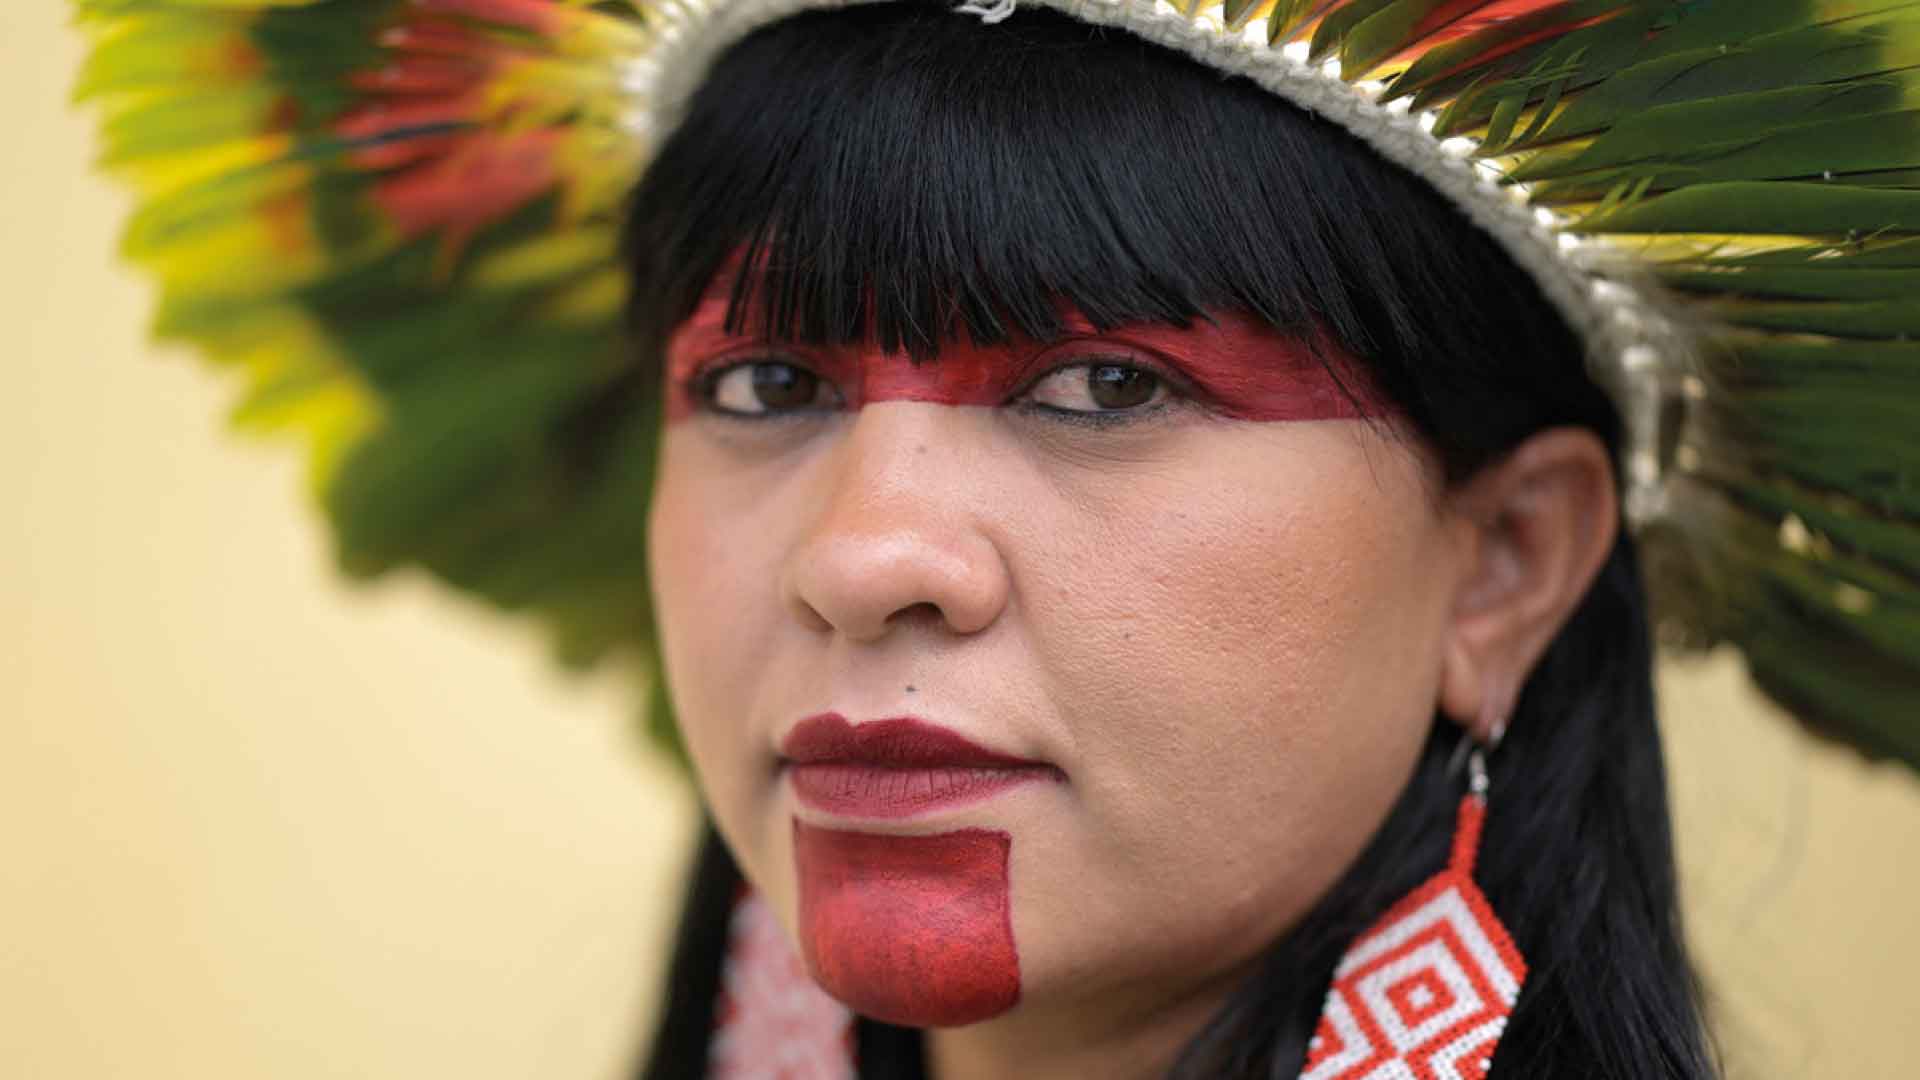 Photo of a woman wearing tribal headdress, large earrings and red paint across her eyes and chin